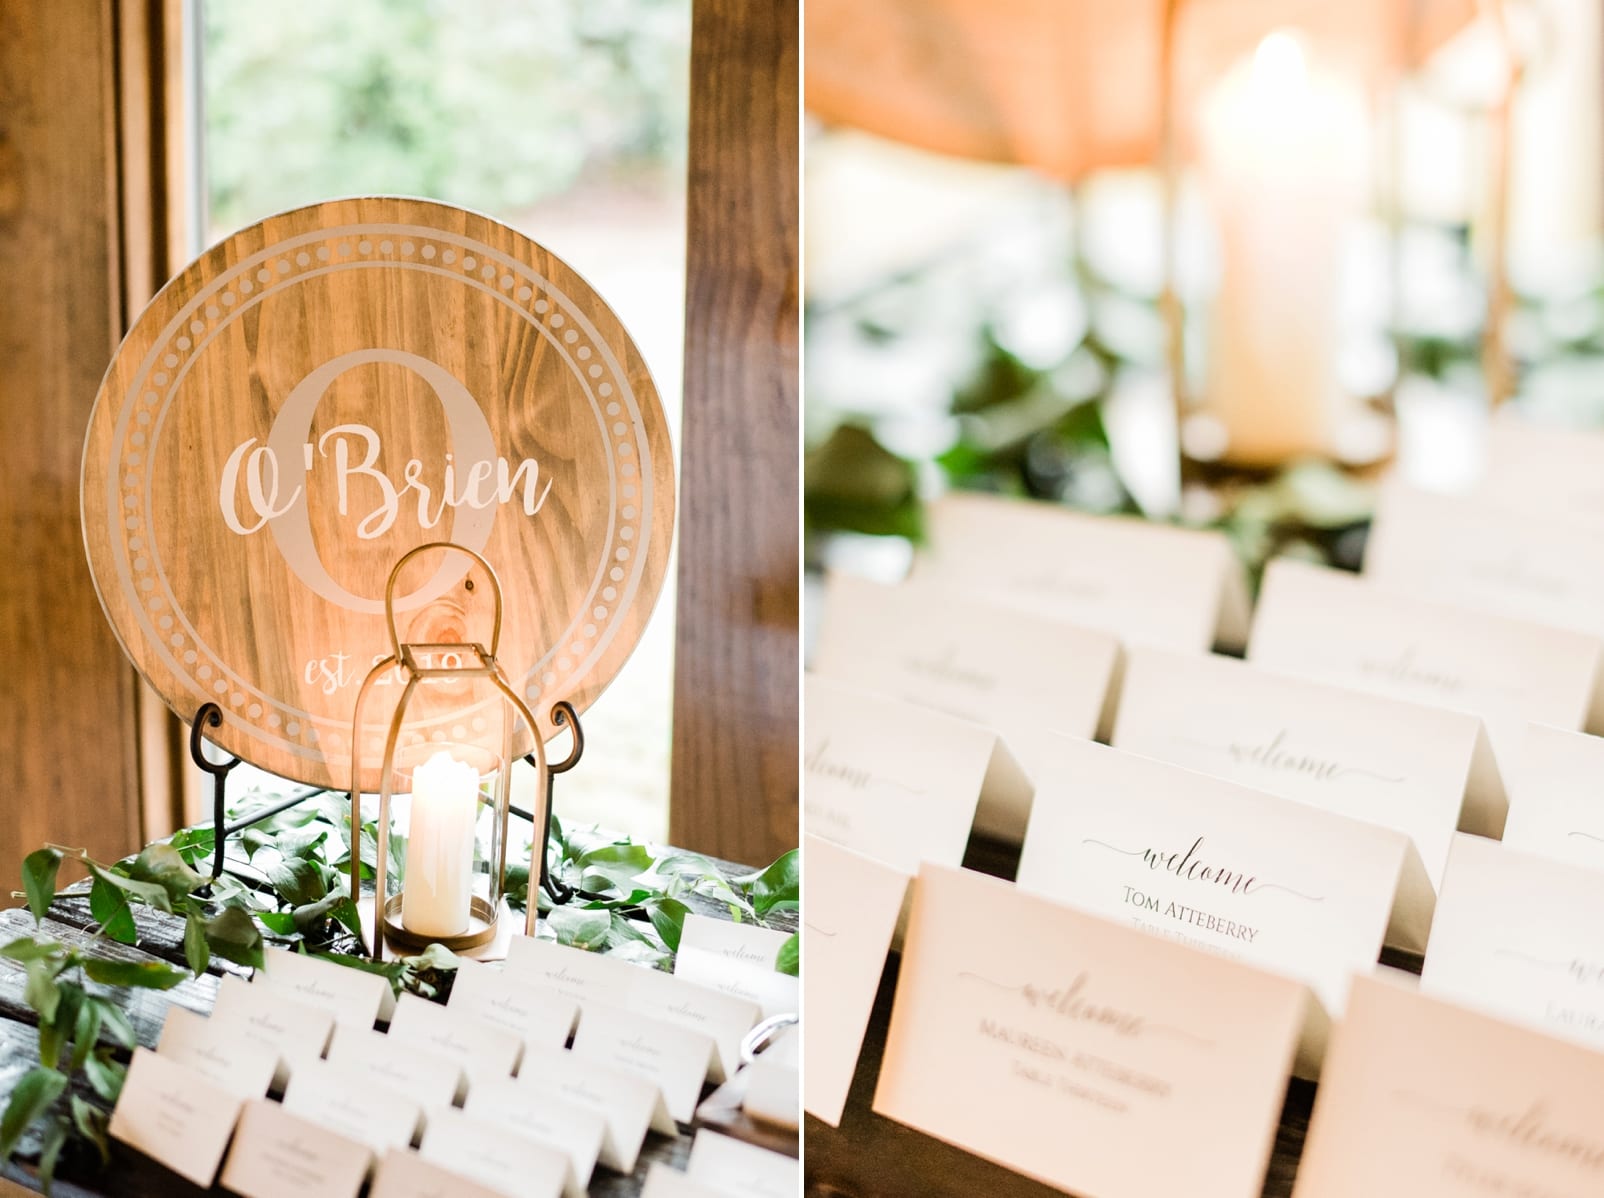 Sutherland estate pavilion reception with escort cards on a table photo